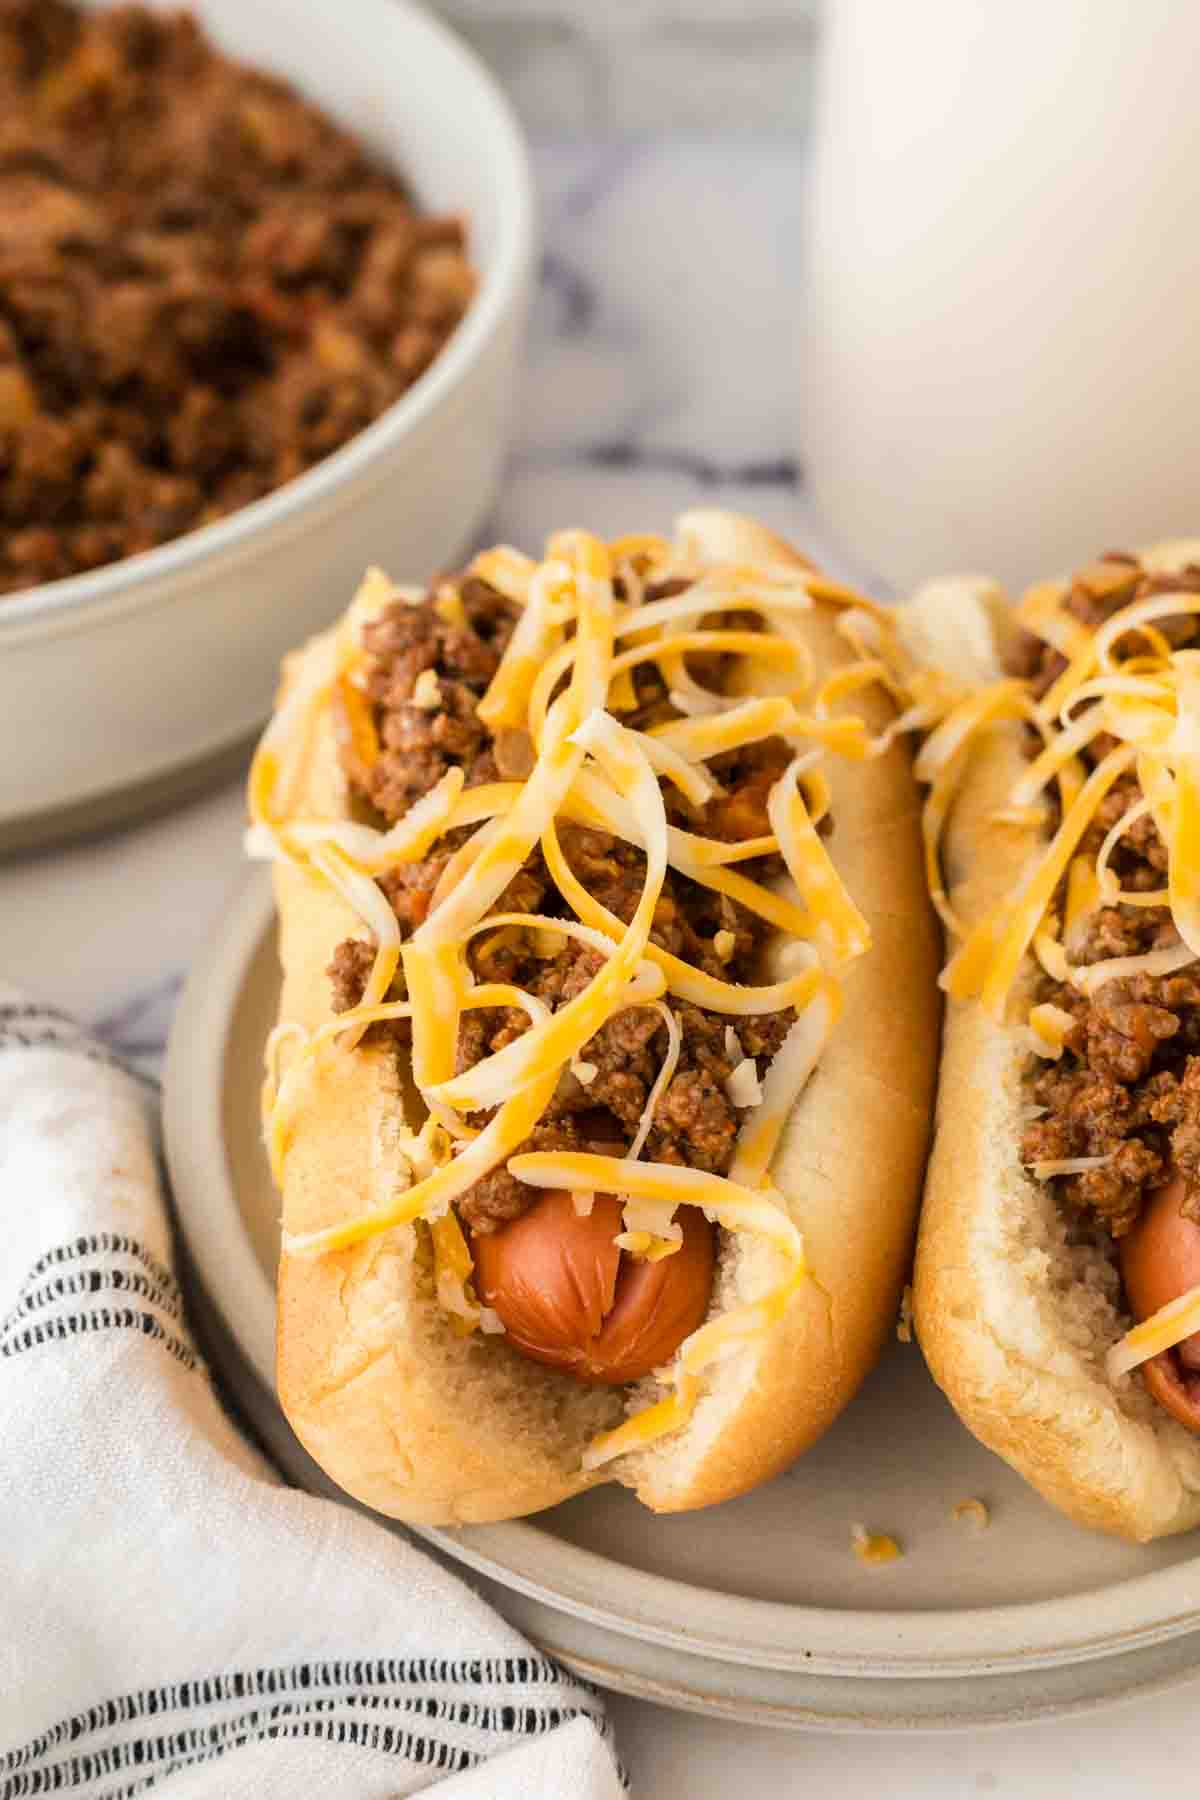 end view of two chili dogs on a plate